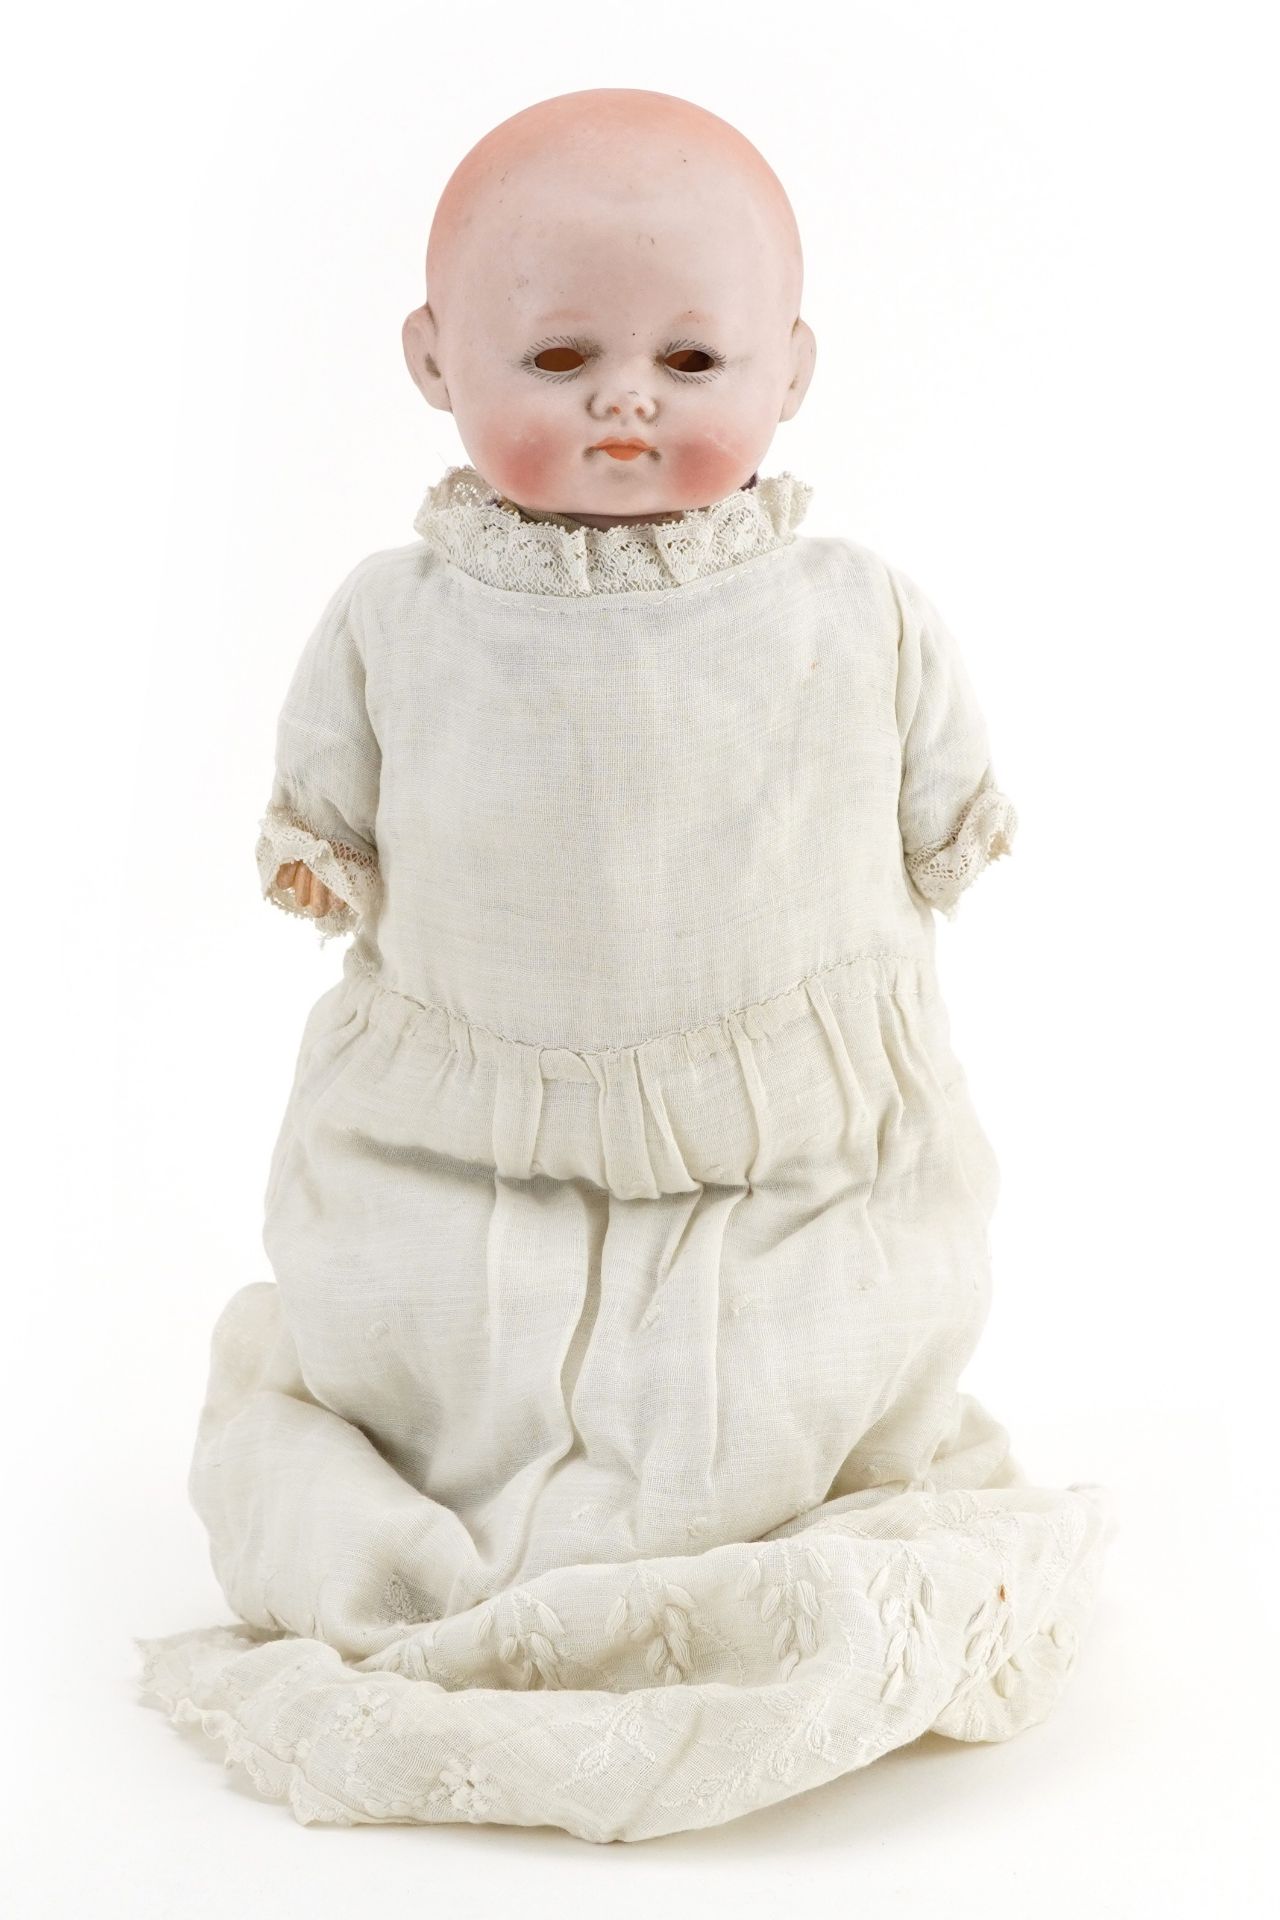 Simon & Halbig, German bisque headed doll, 30cm high : For further information on this lot please